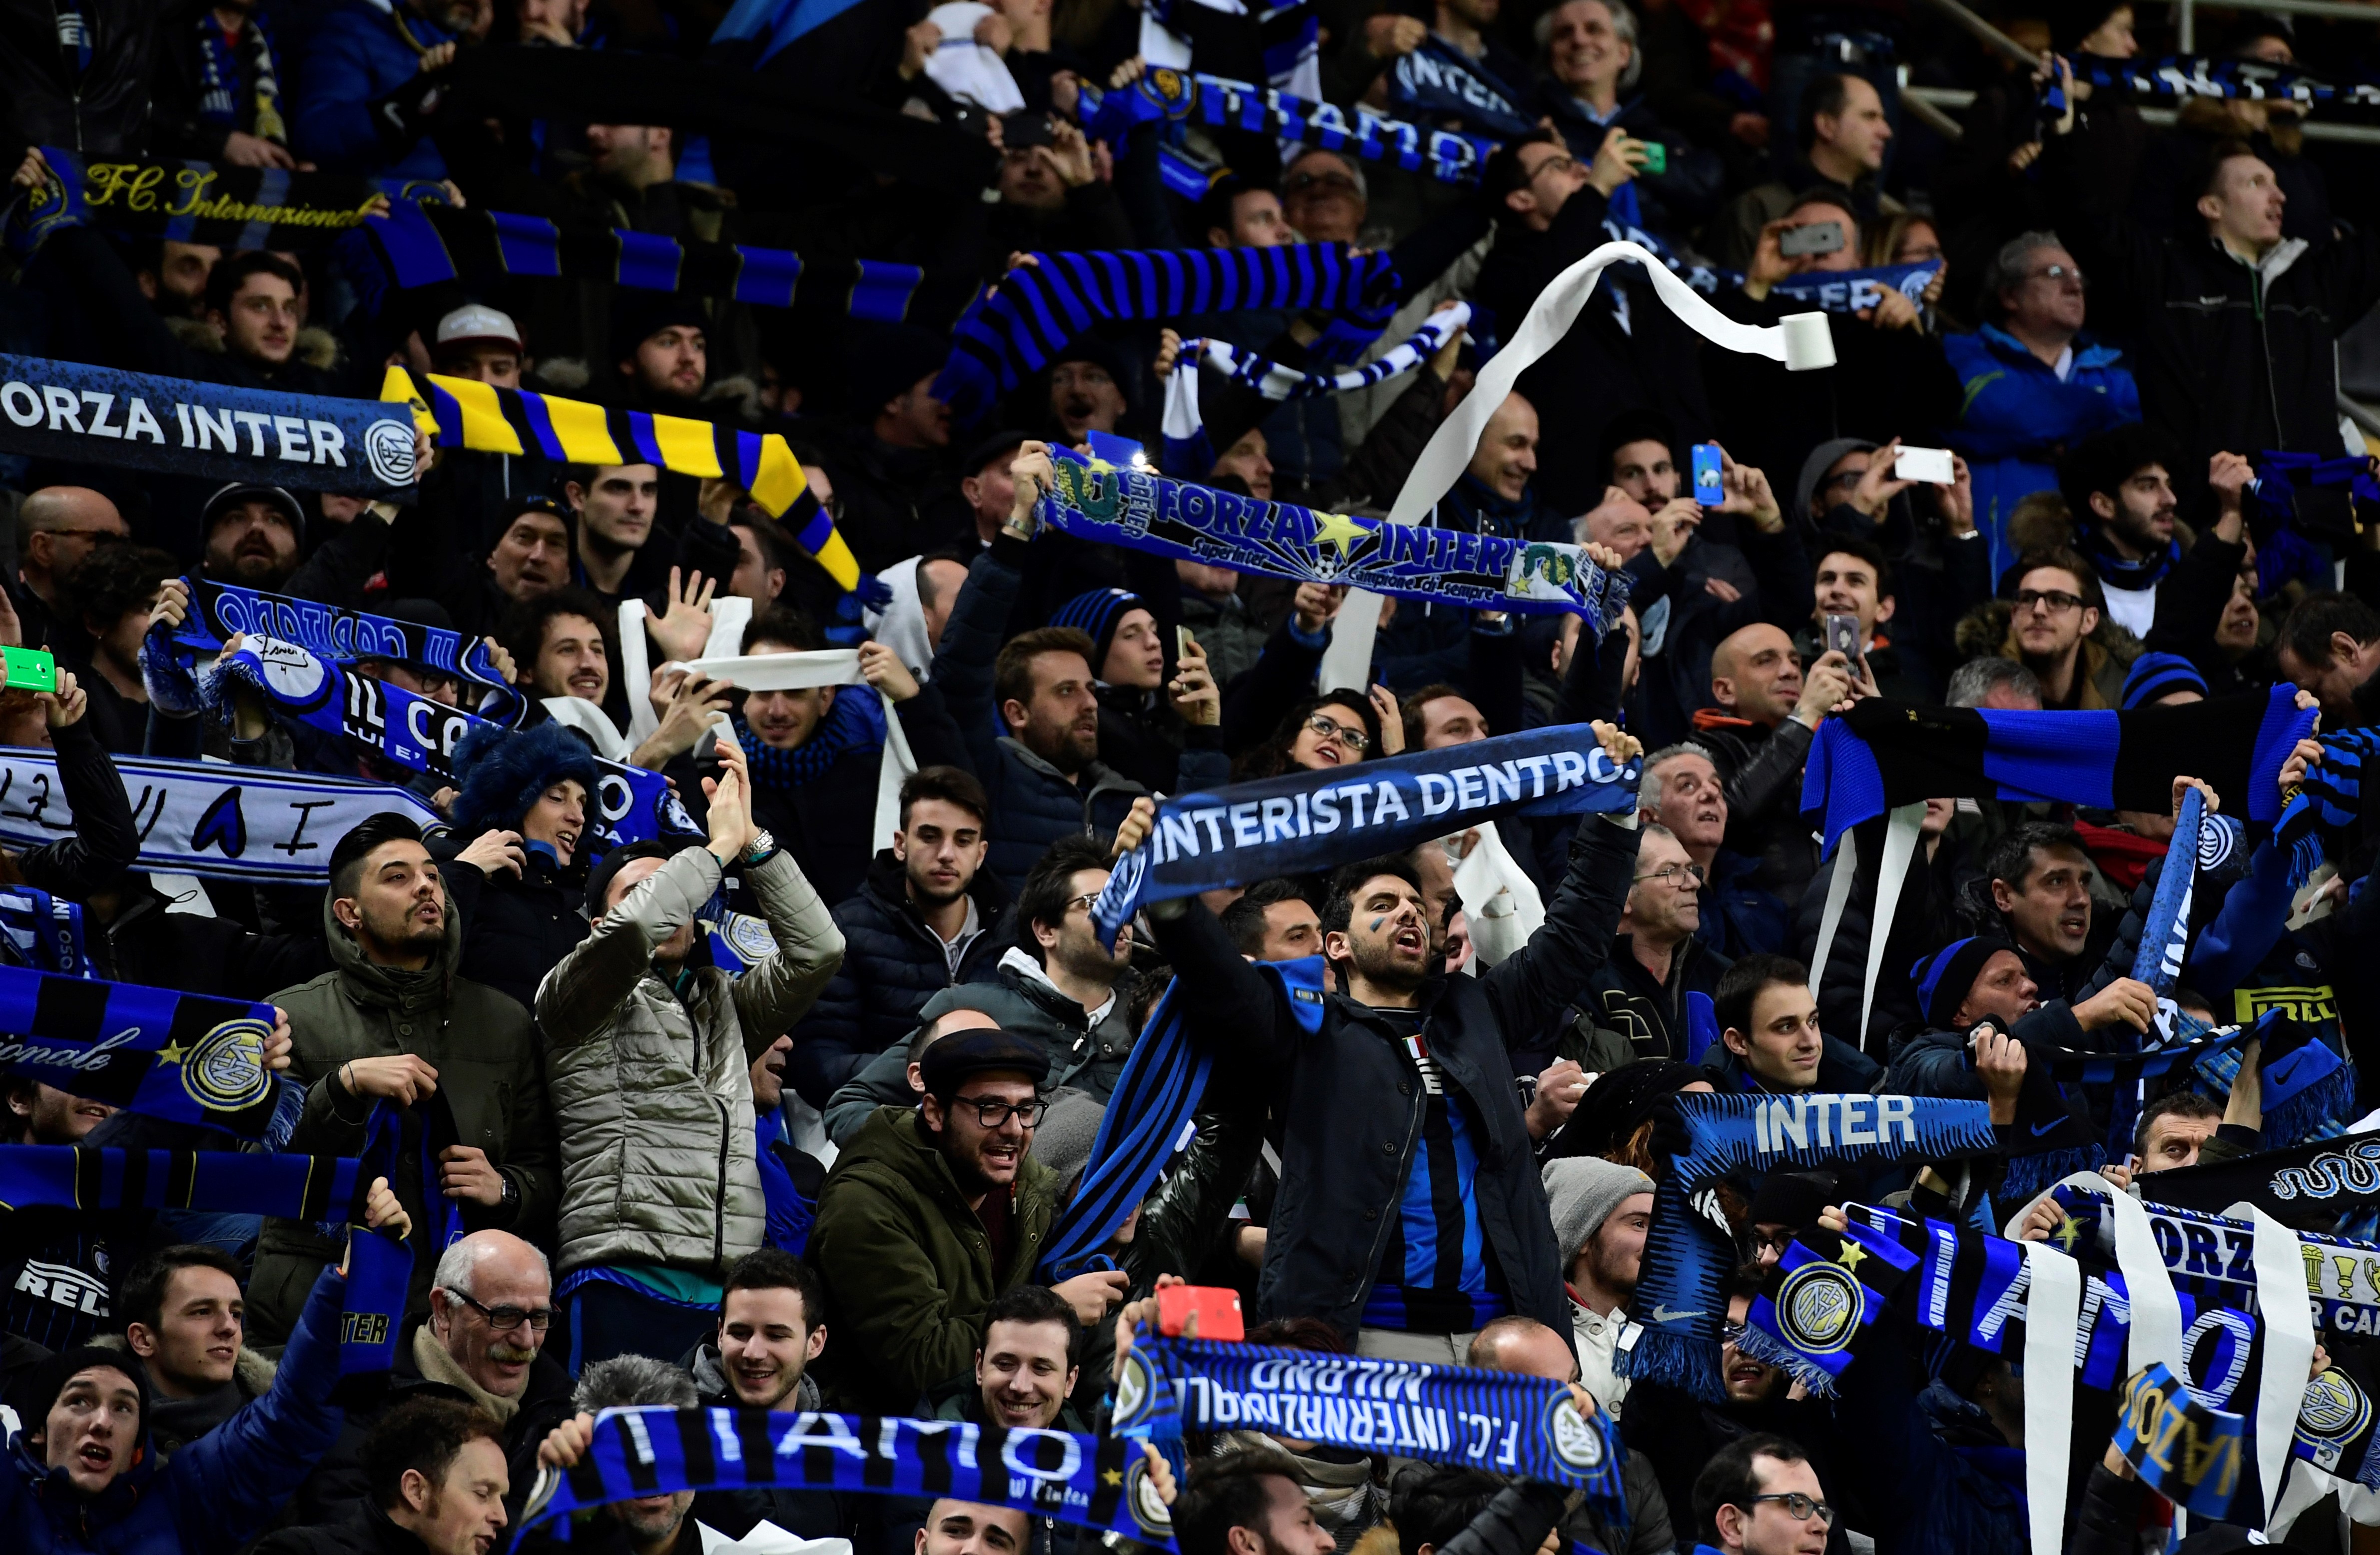 Inter’s Curva Nord To Be Under Close Observation From Authorities